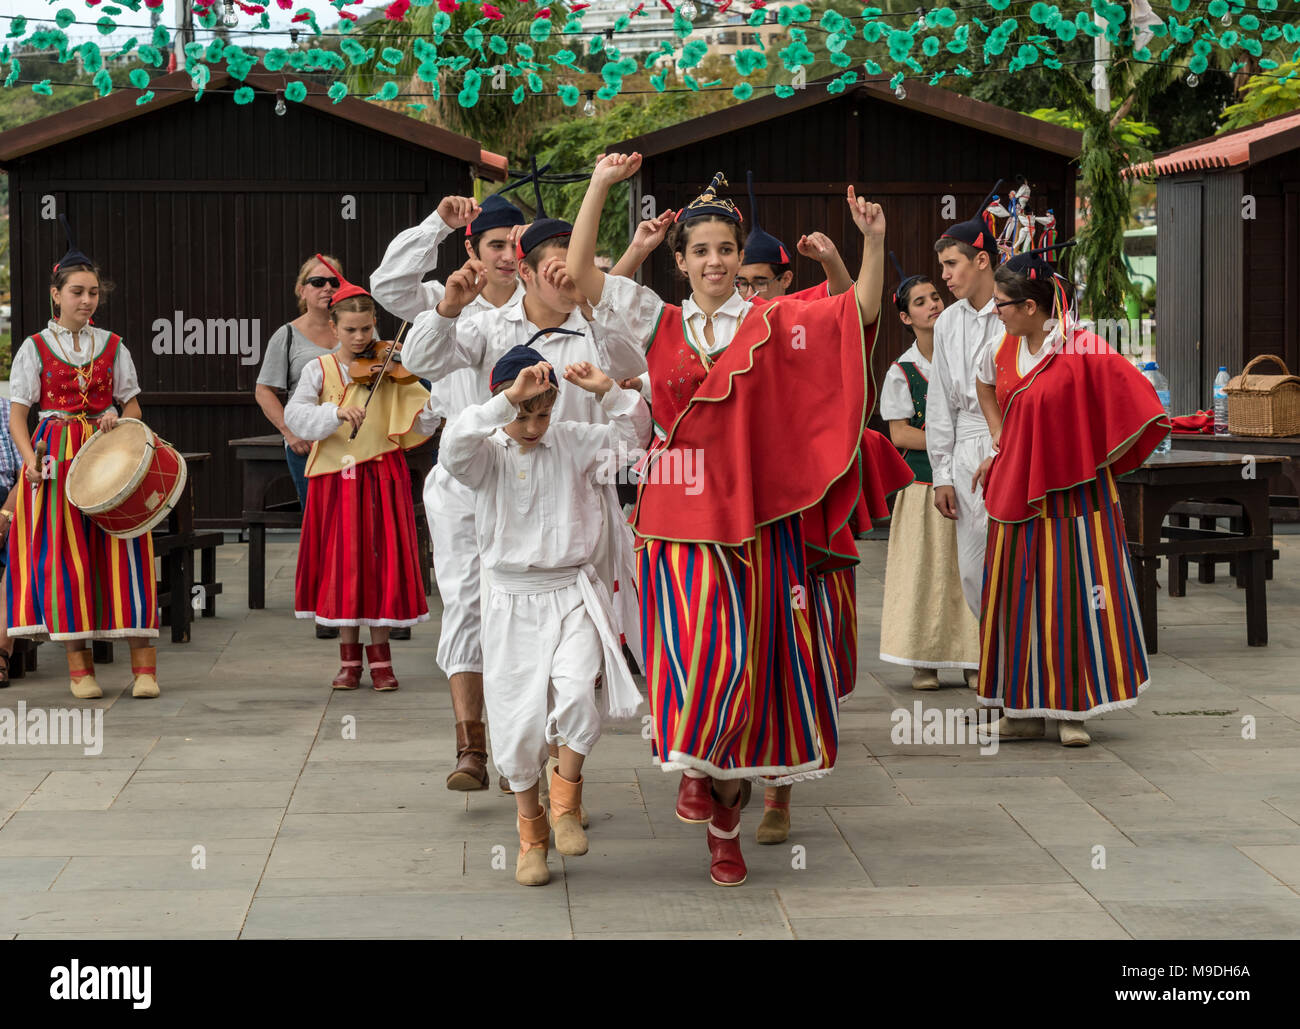 Dancers in traditional costume performing a Madeiran folk dance Stock Photo